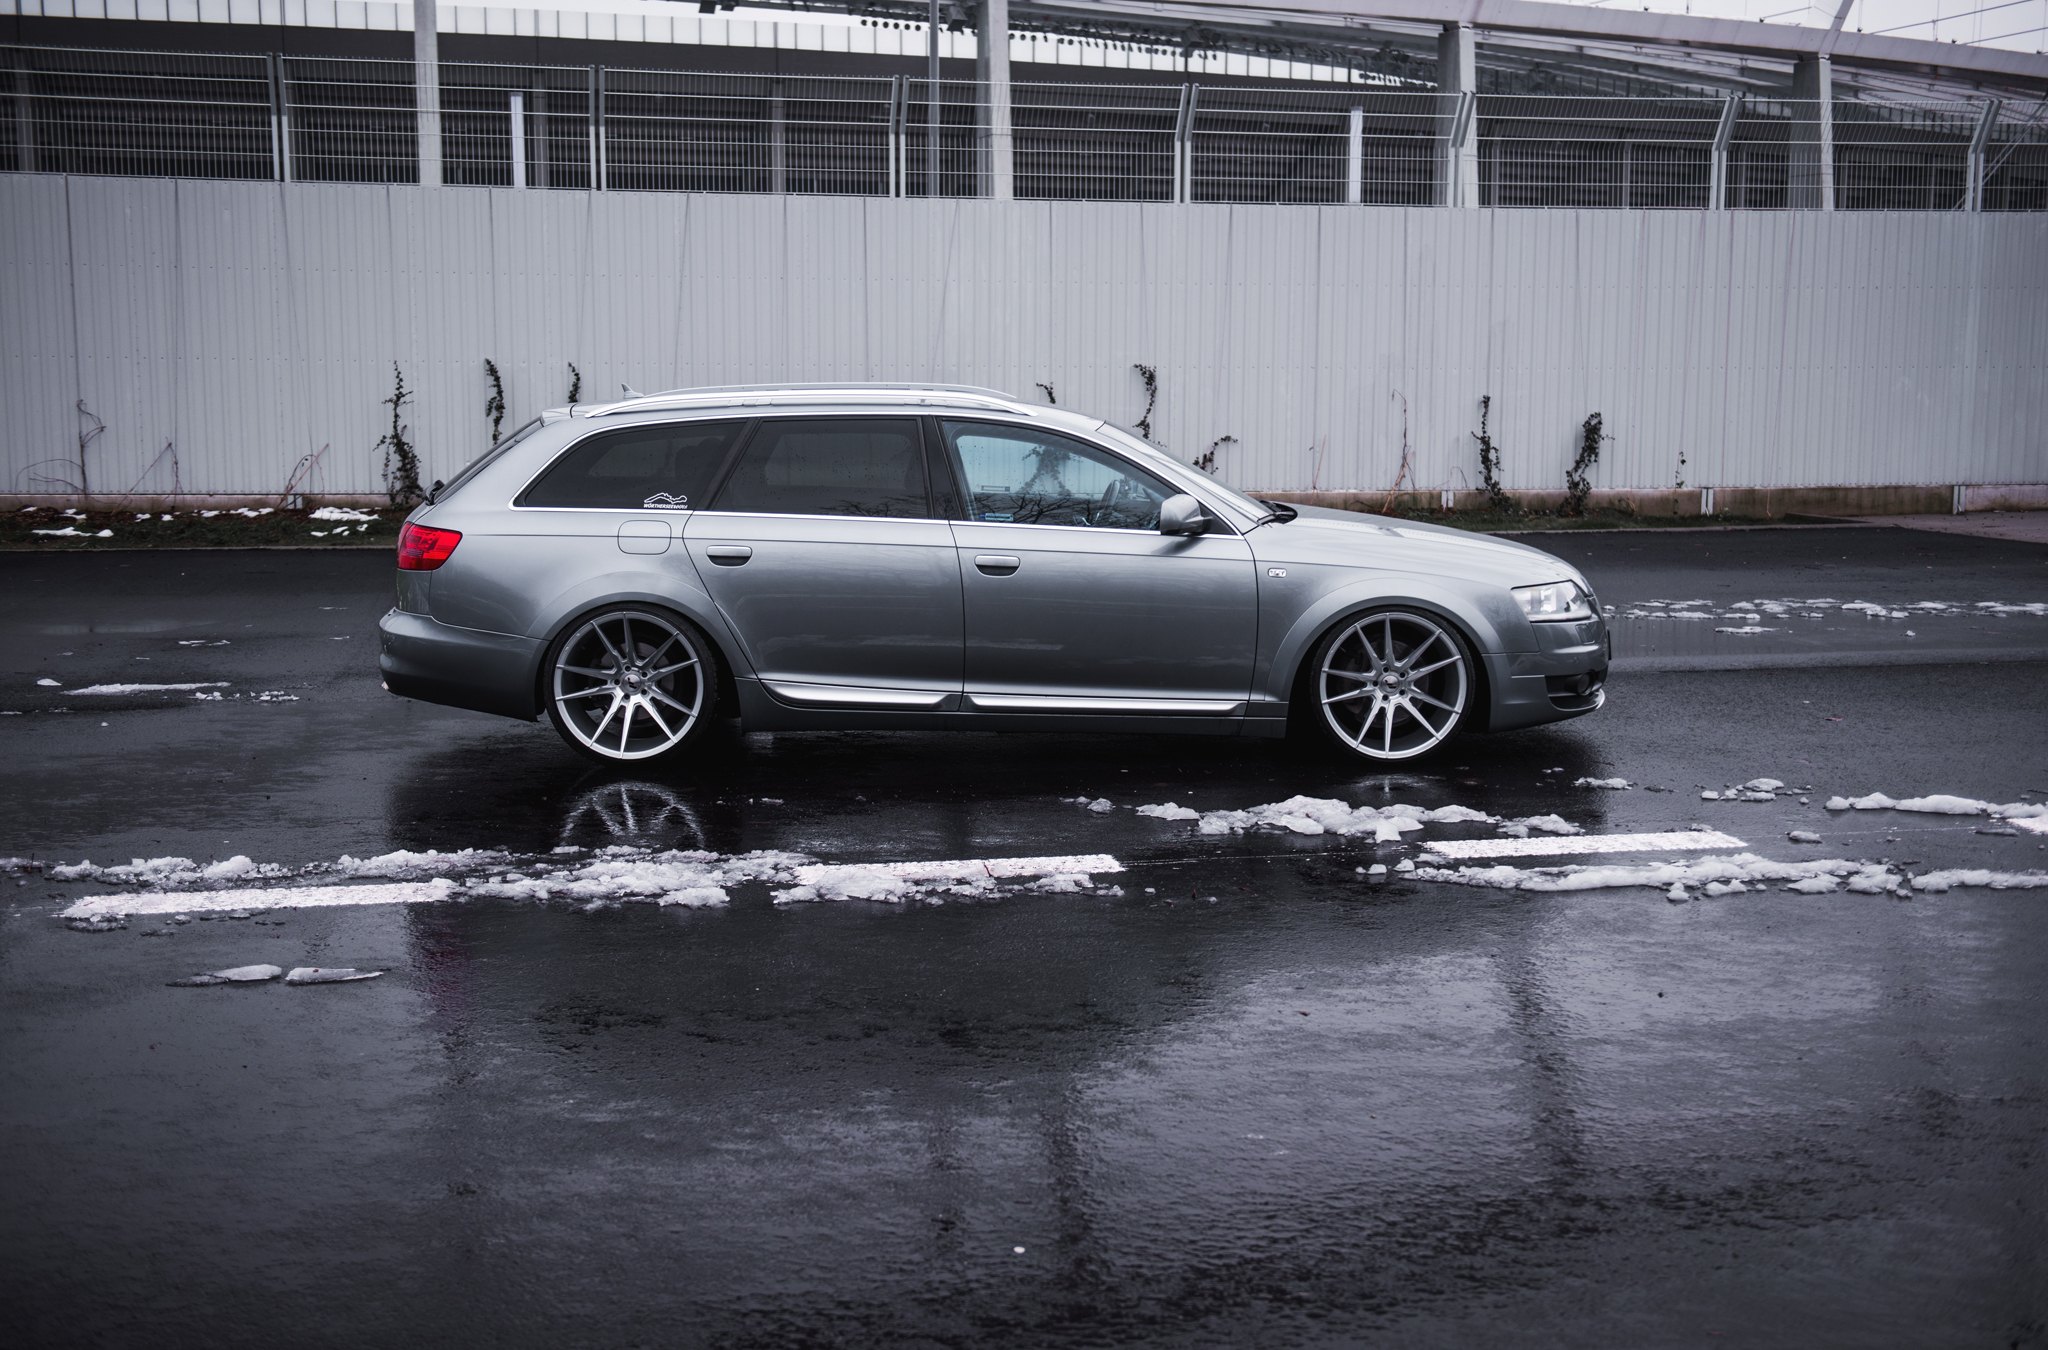 Aftermarket Side Skirts on Gray Audi A6 - Photo by JR Wheels